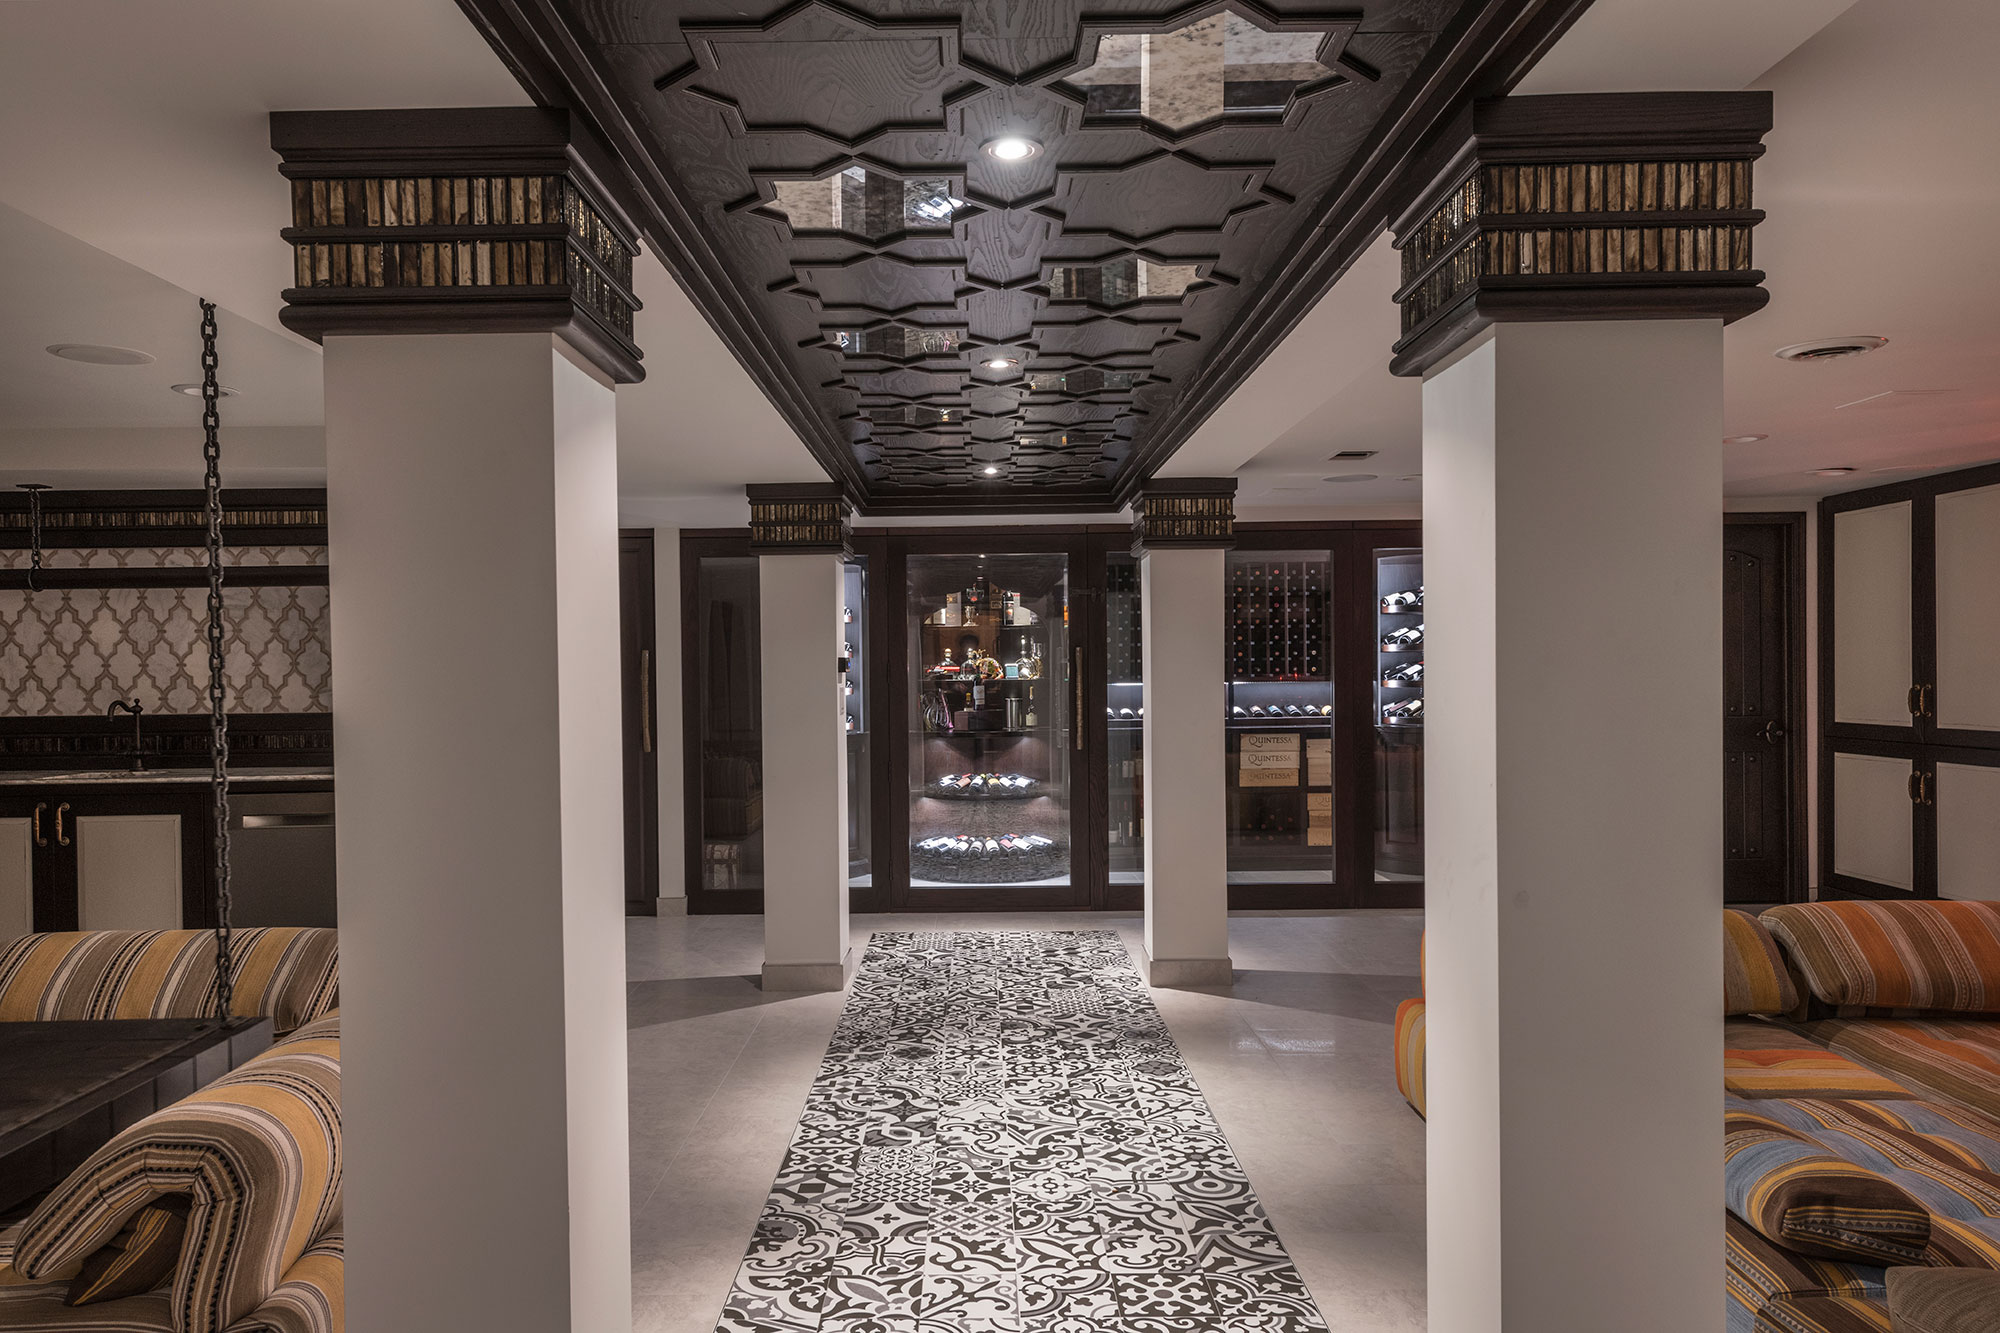 Lower level entrance view of wine cellar with Middle Eastern flair.  - Glenview Haus - Custom Doors, Wine Cellars and Cabinets in Chicago